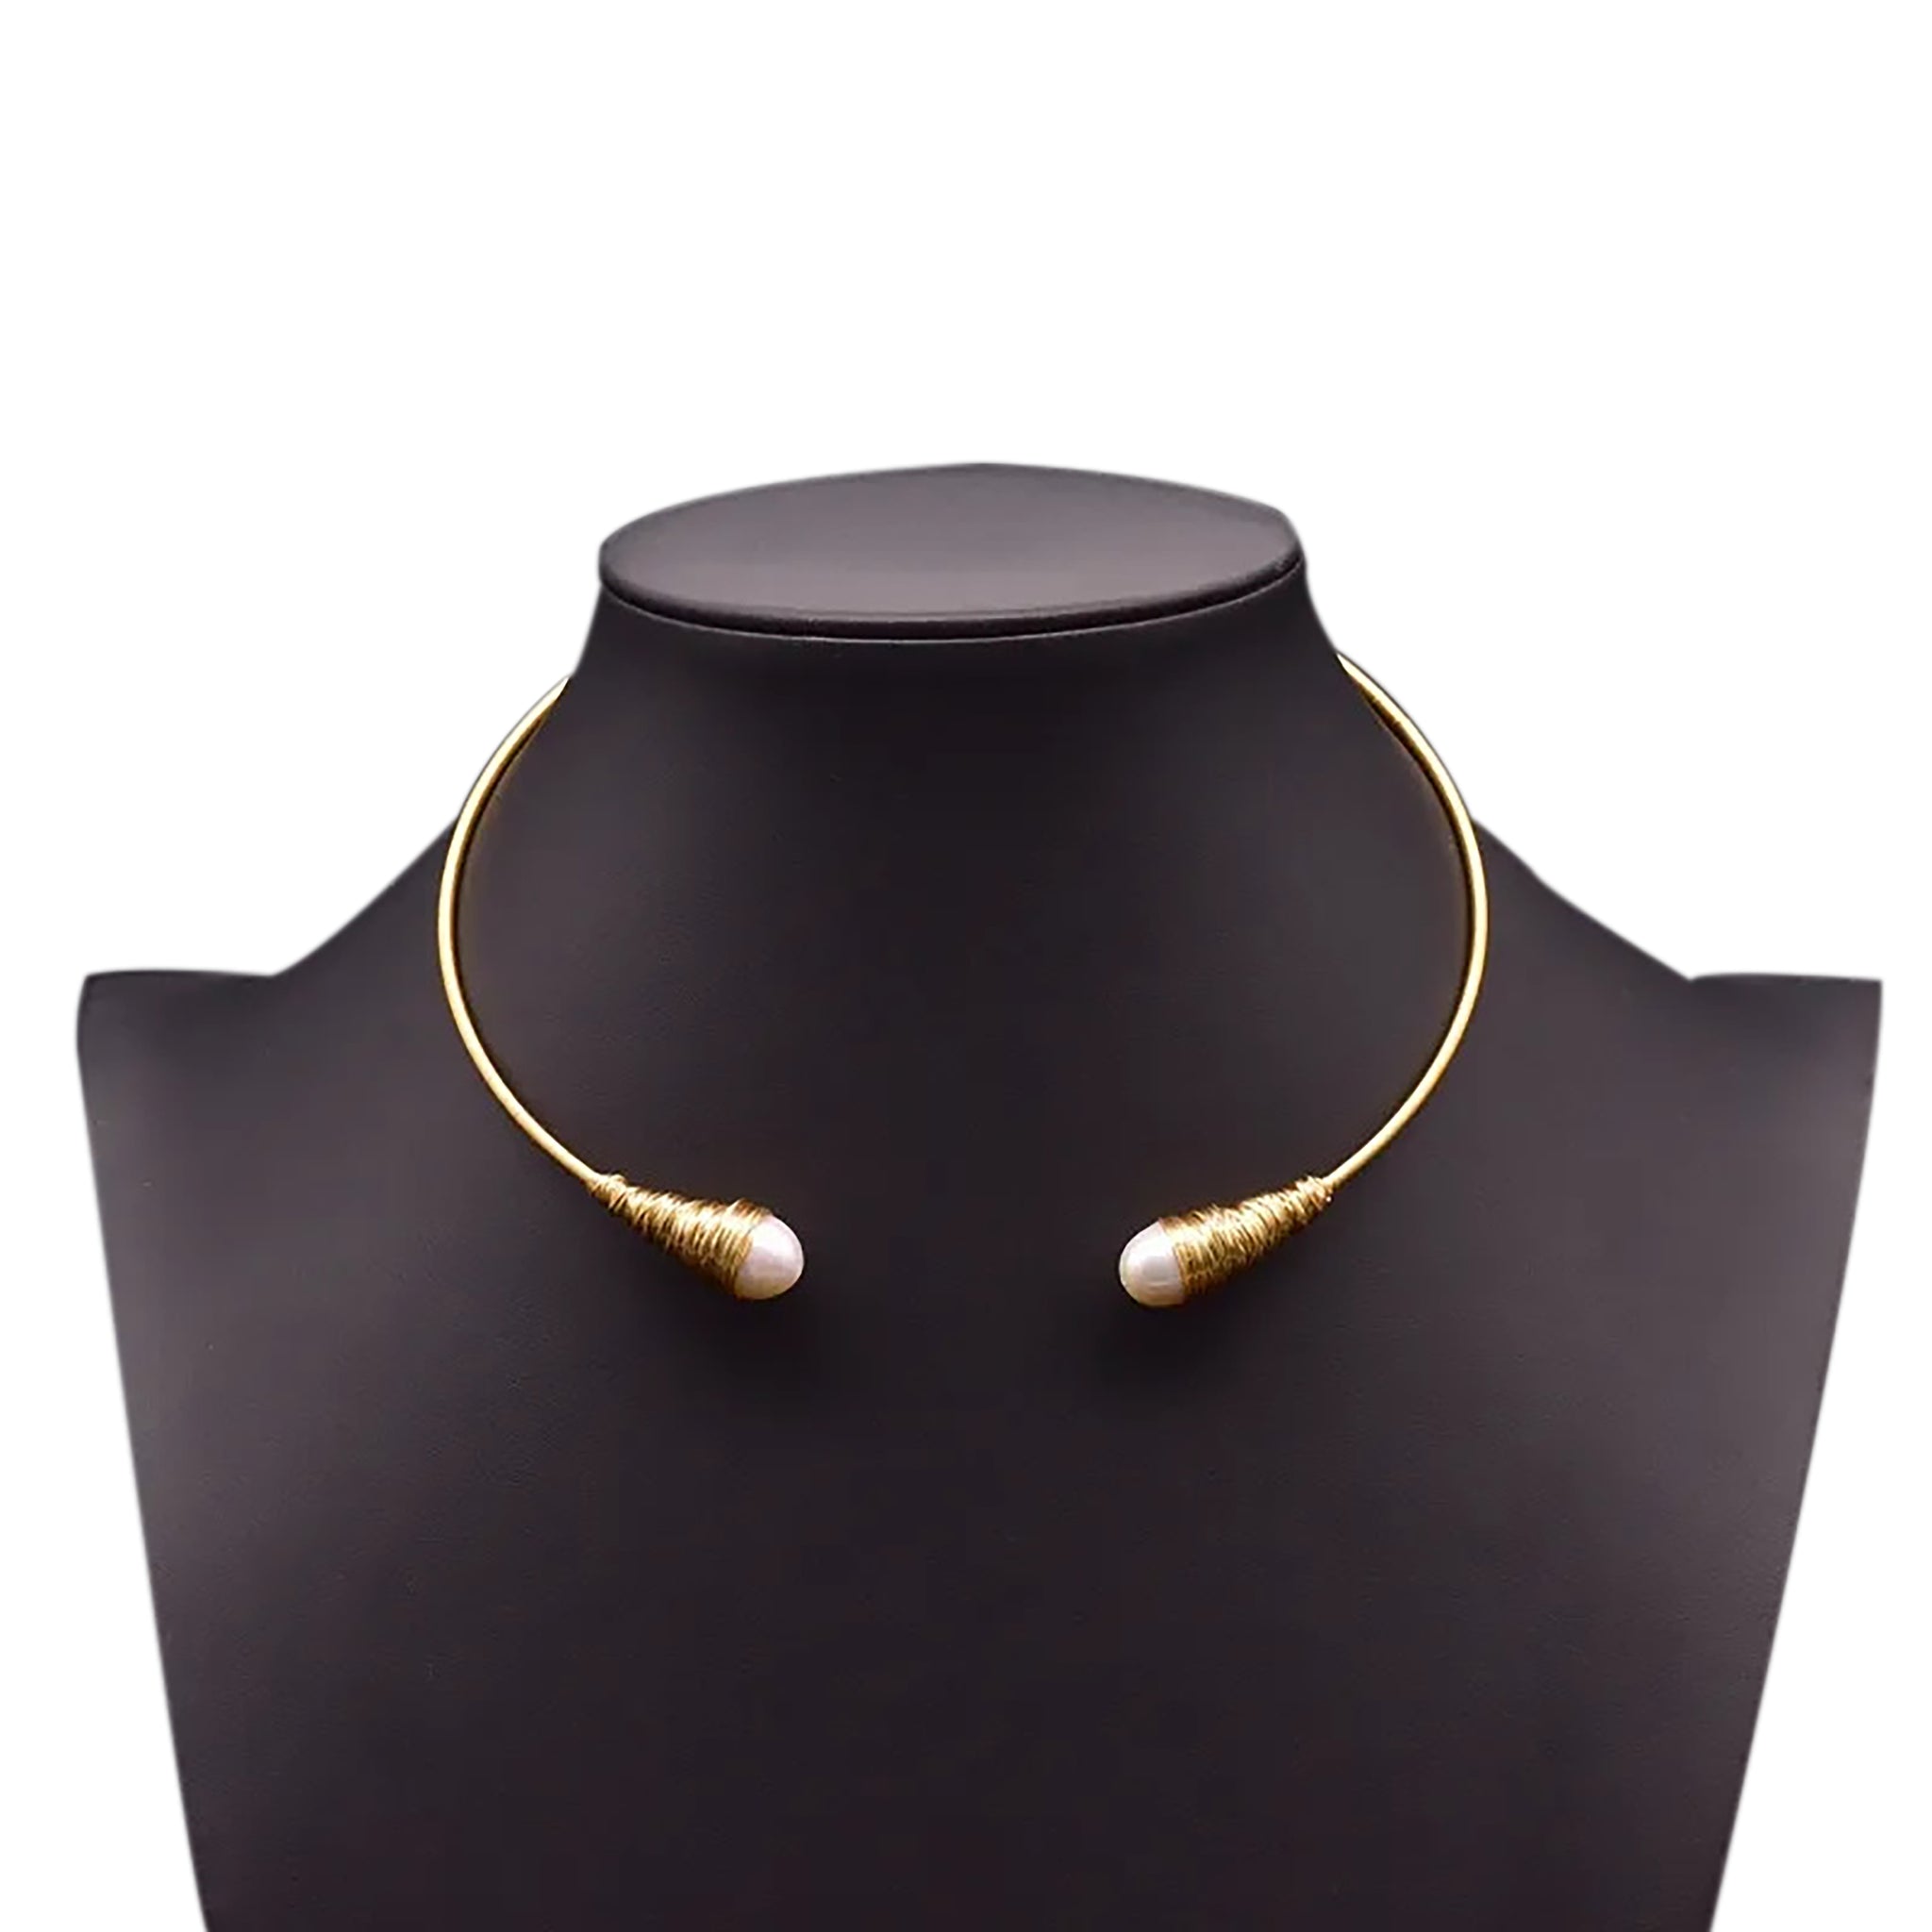 Chokore Freshwater Pearl Choker Necklace with wire detailing